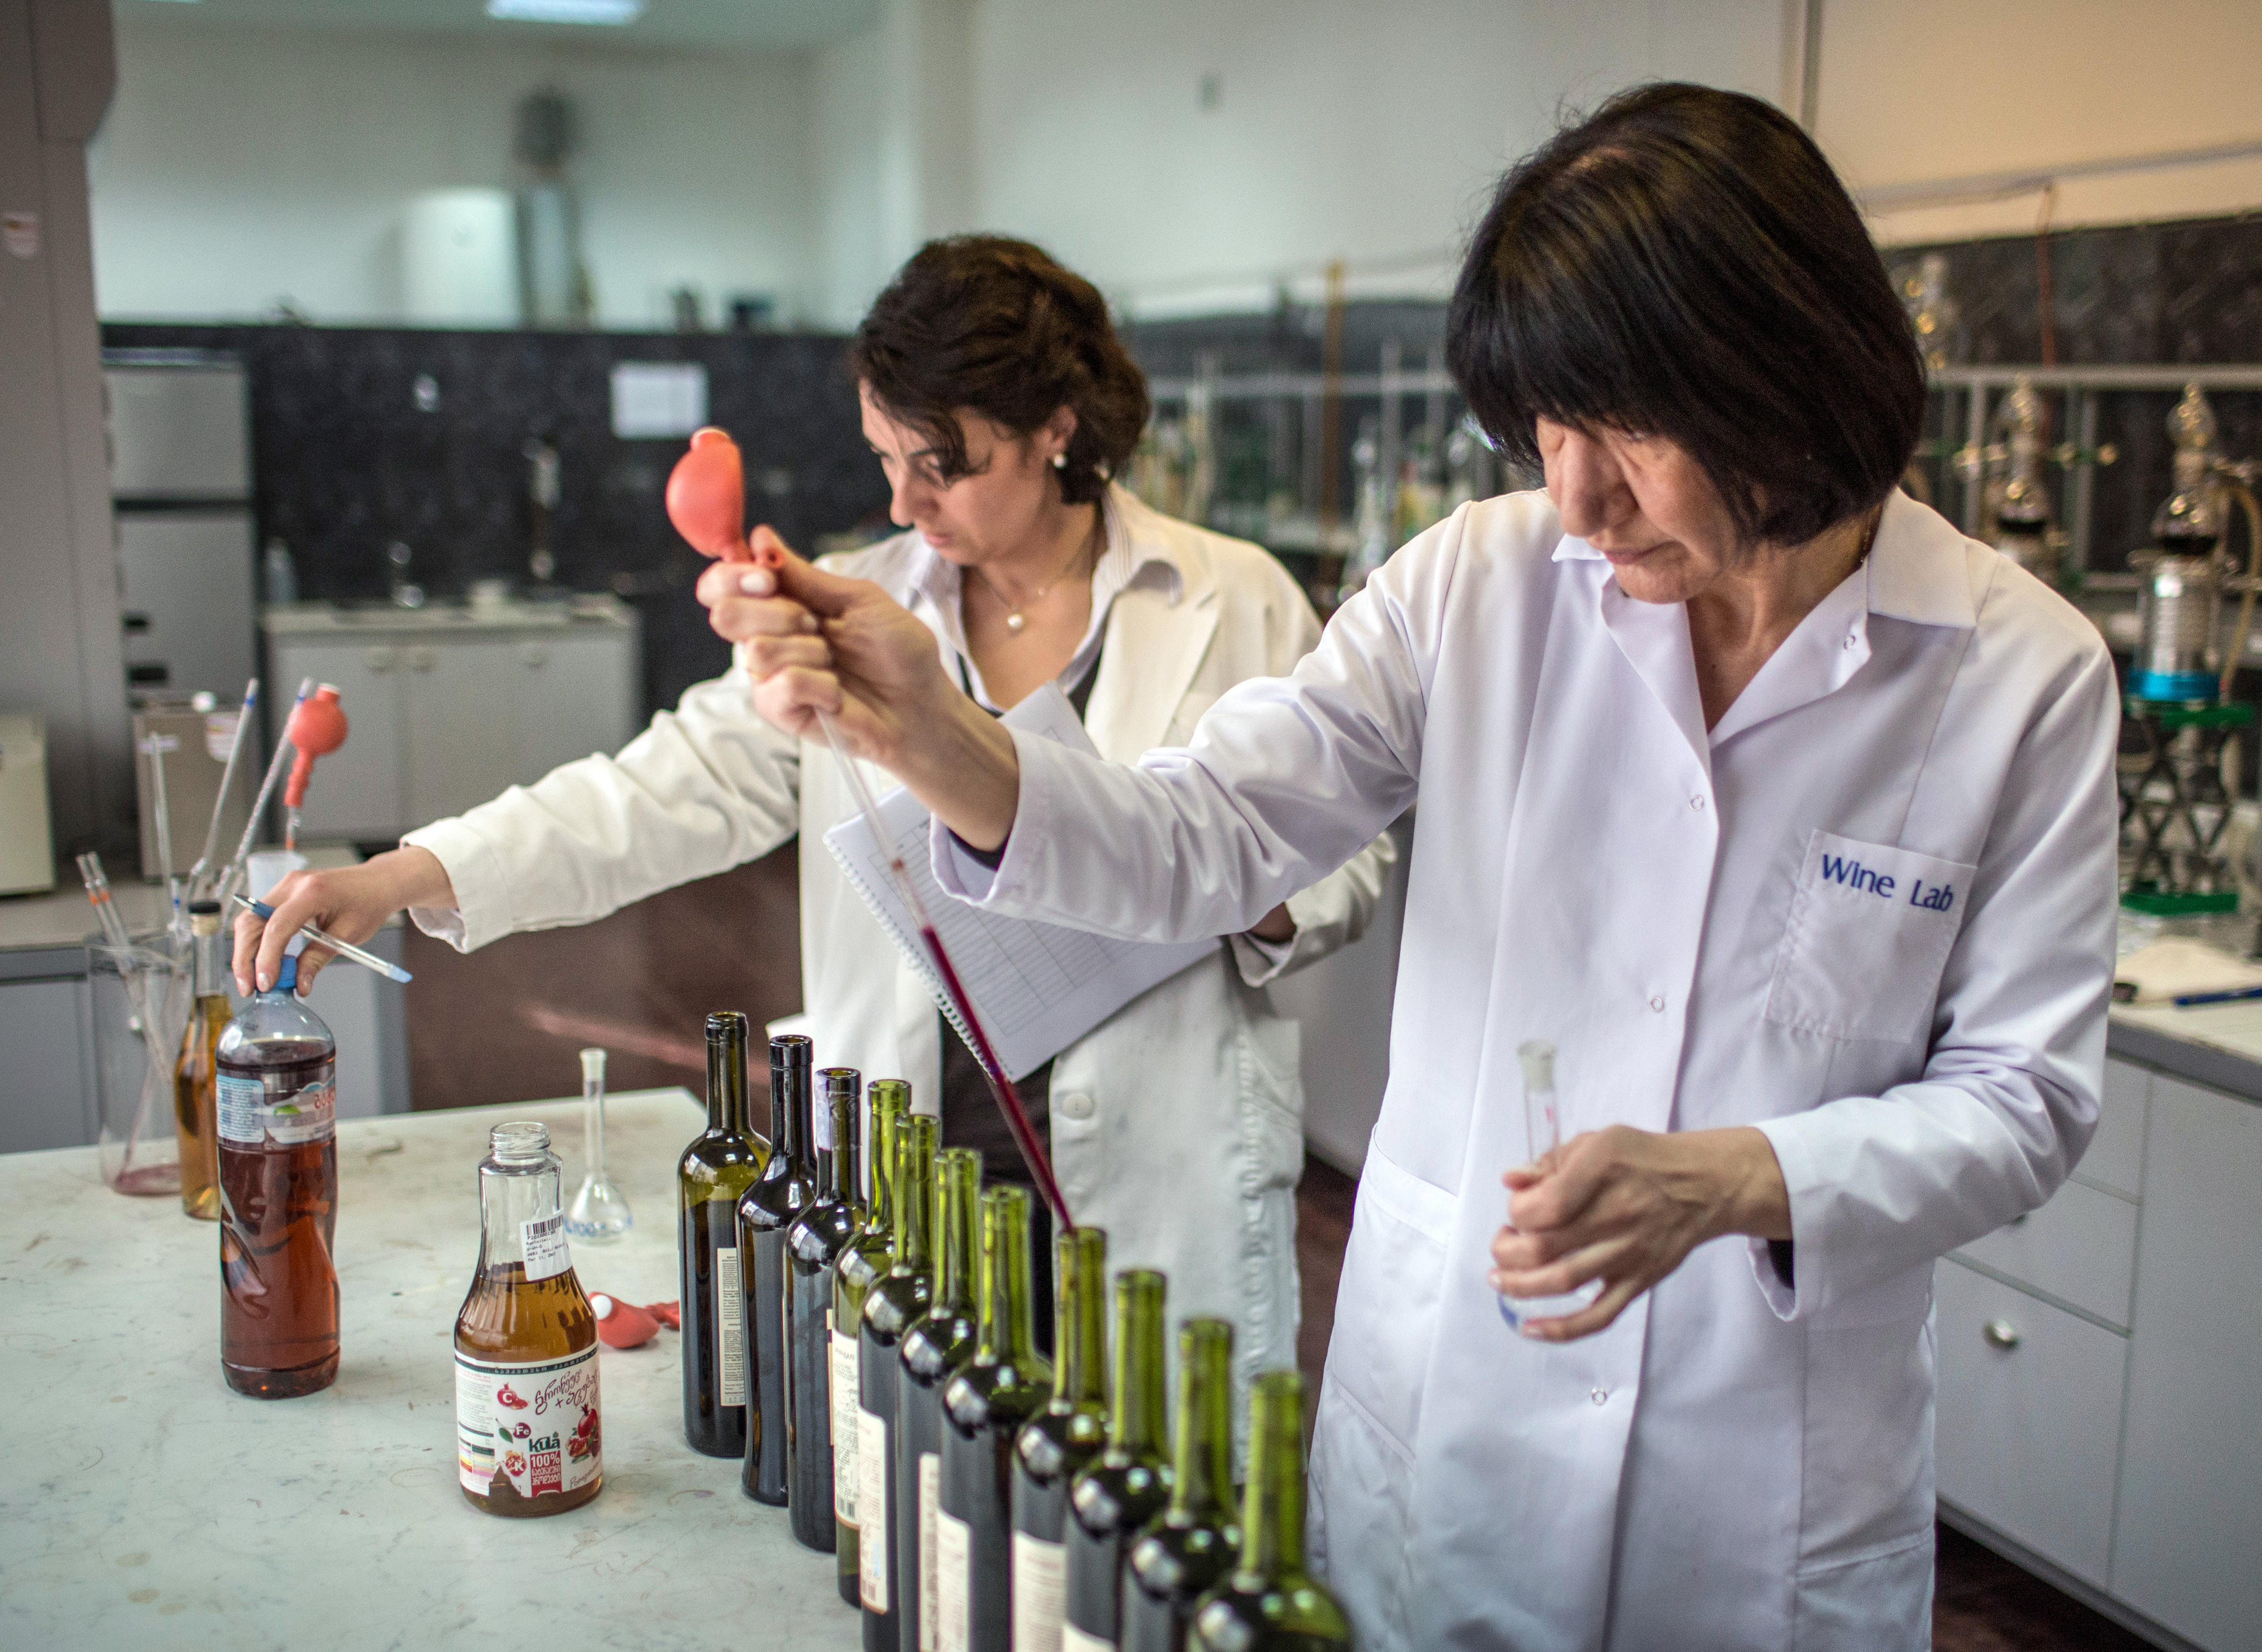 Employees of a wine laboratory in Tbilisi, Georgia